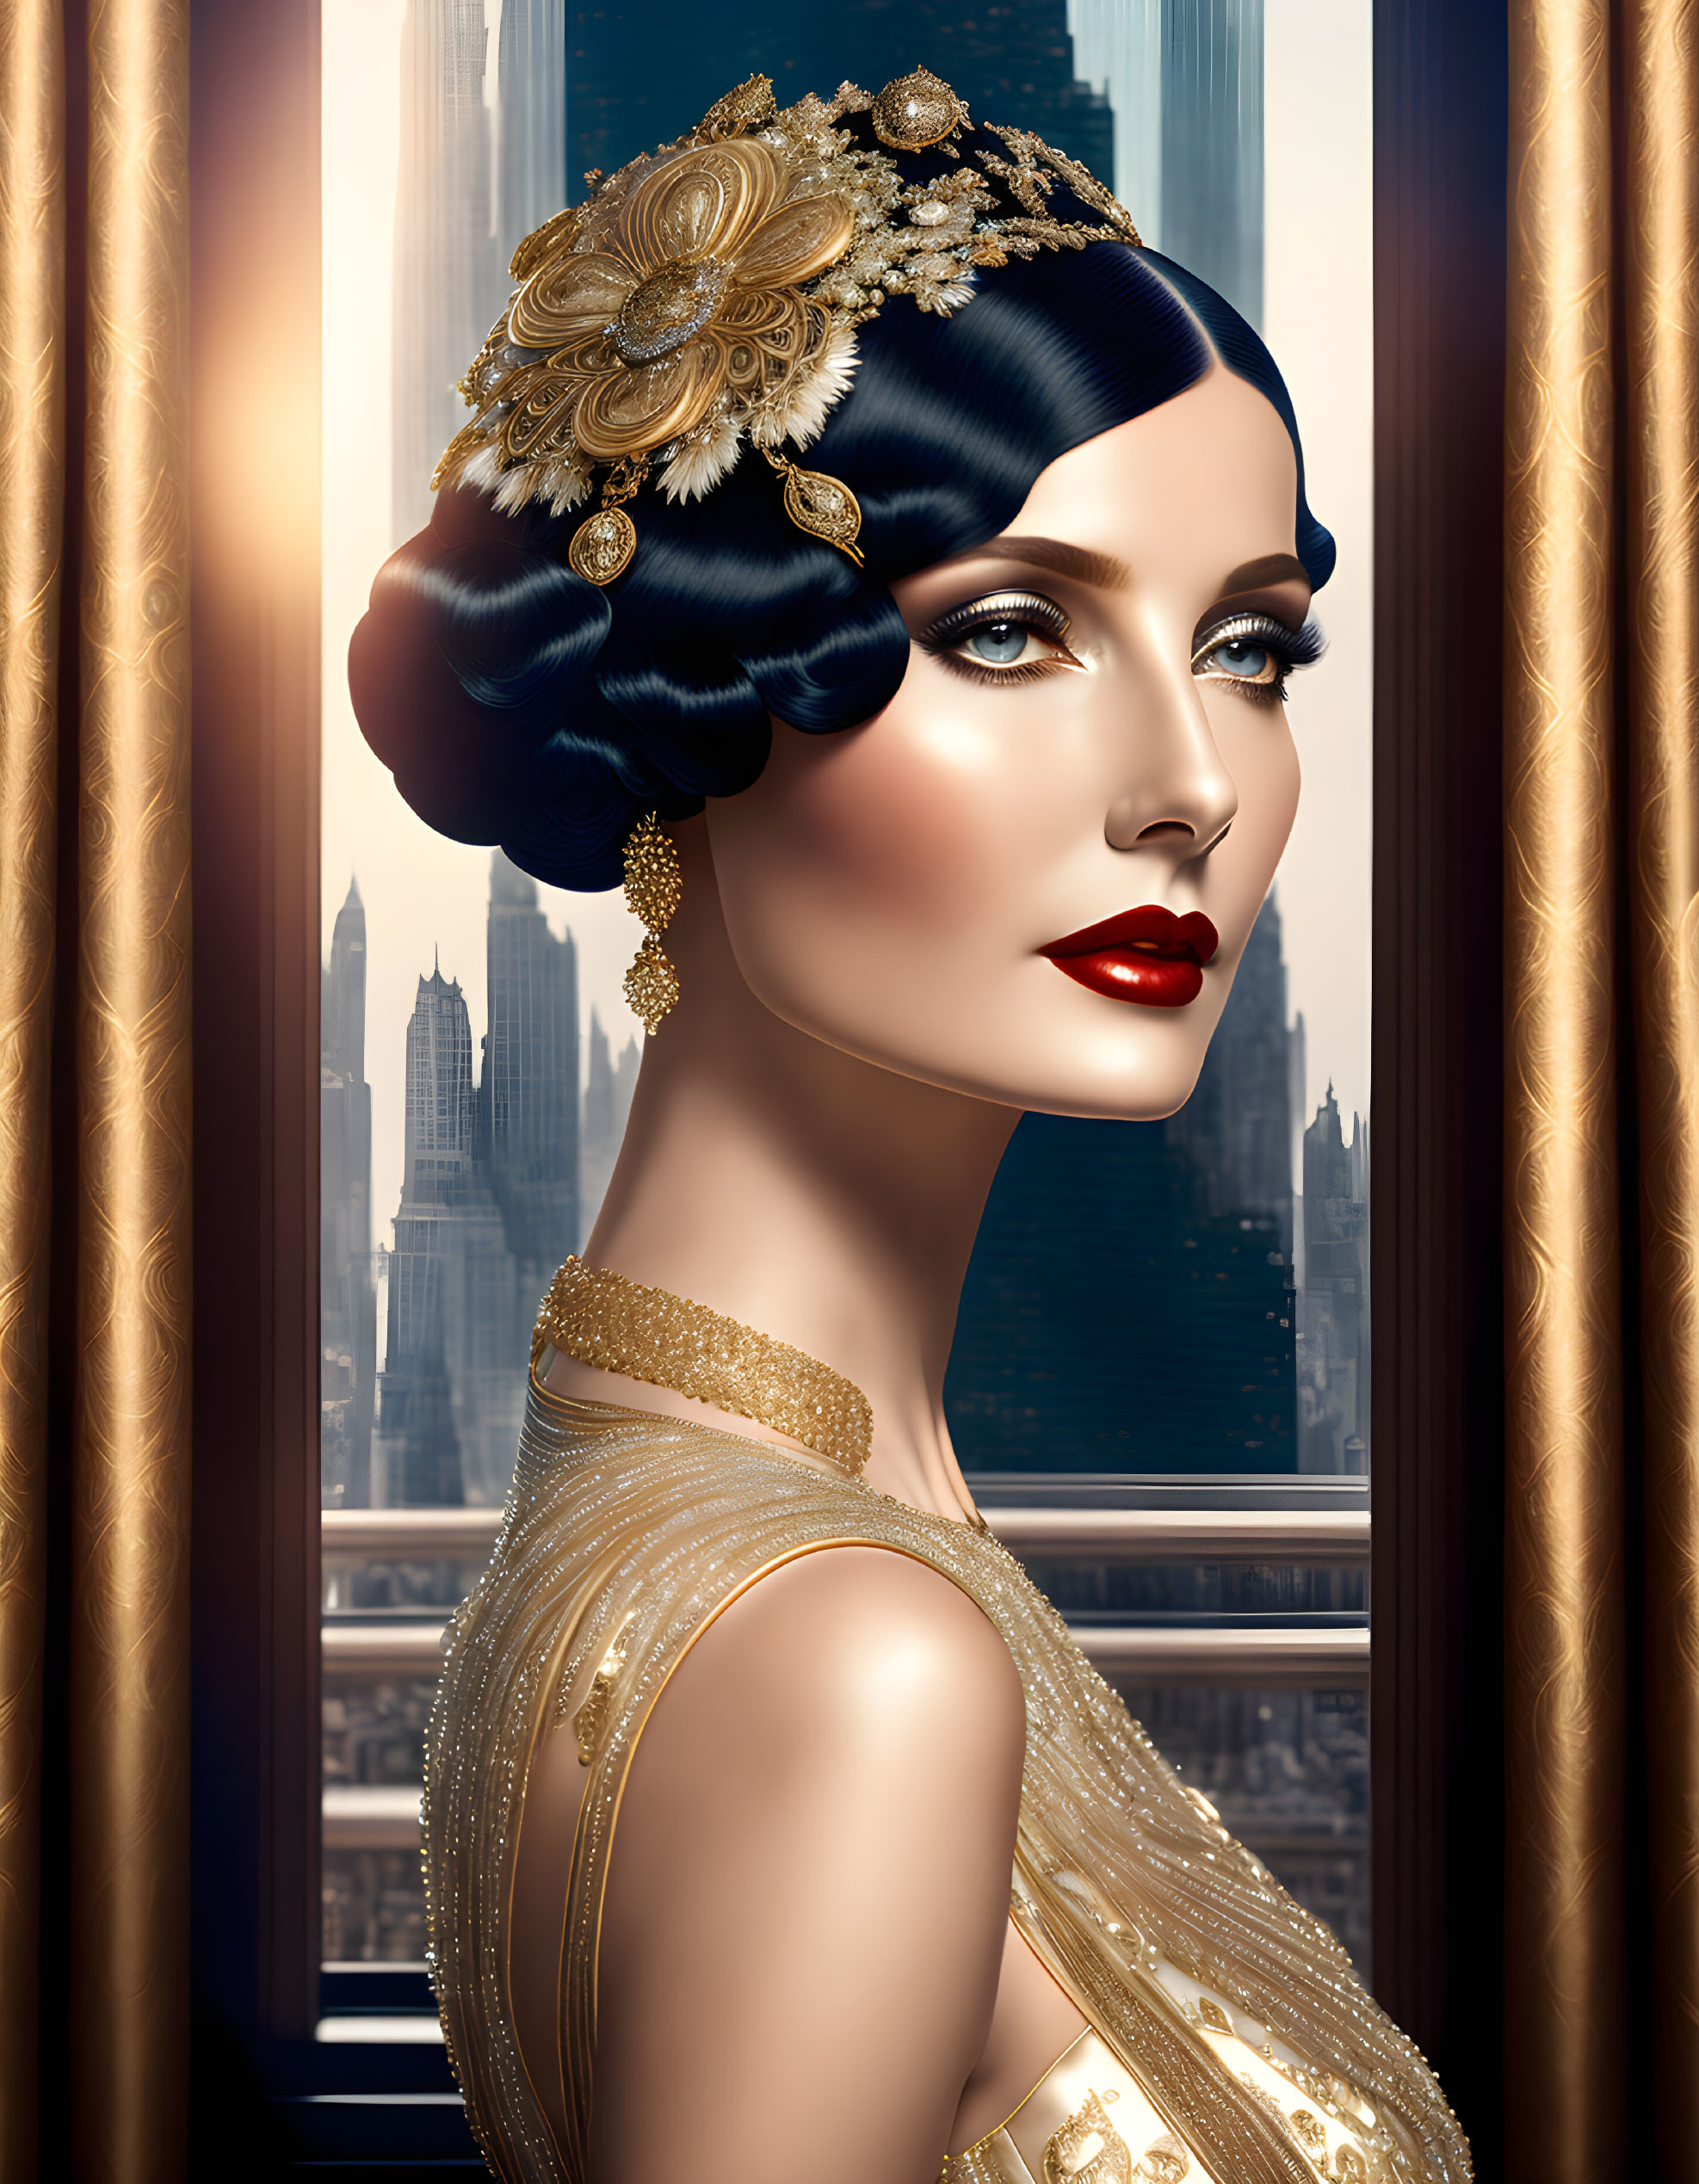 Digital illustration of elegant woman with vintage hairstyle, golden jewelry, red lipstick, and cityscape background